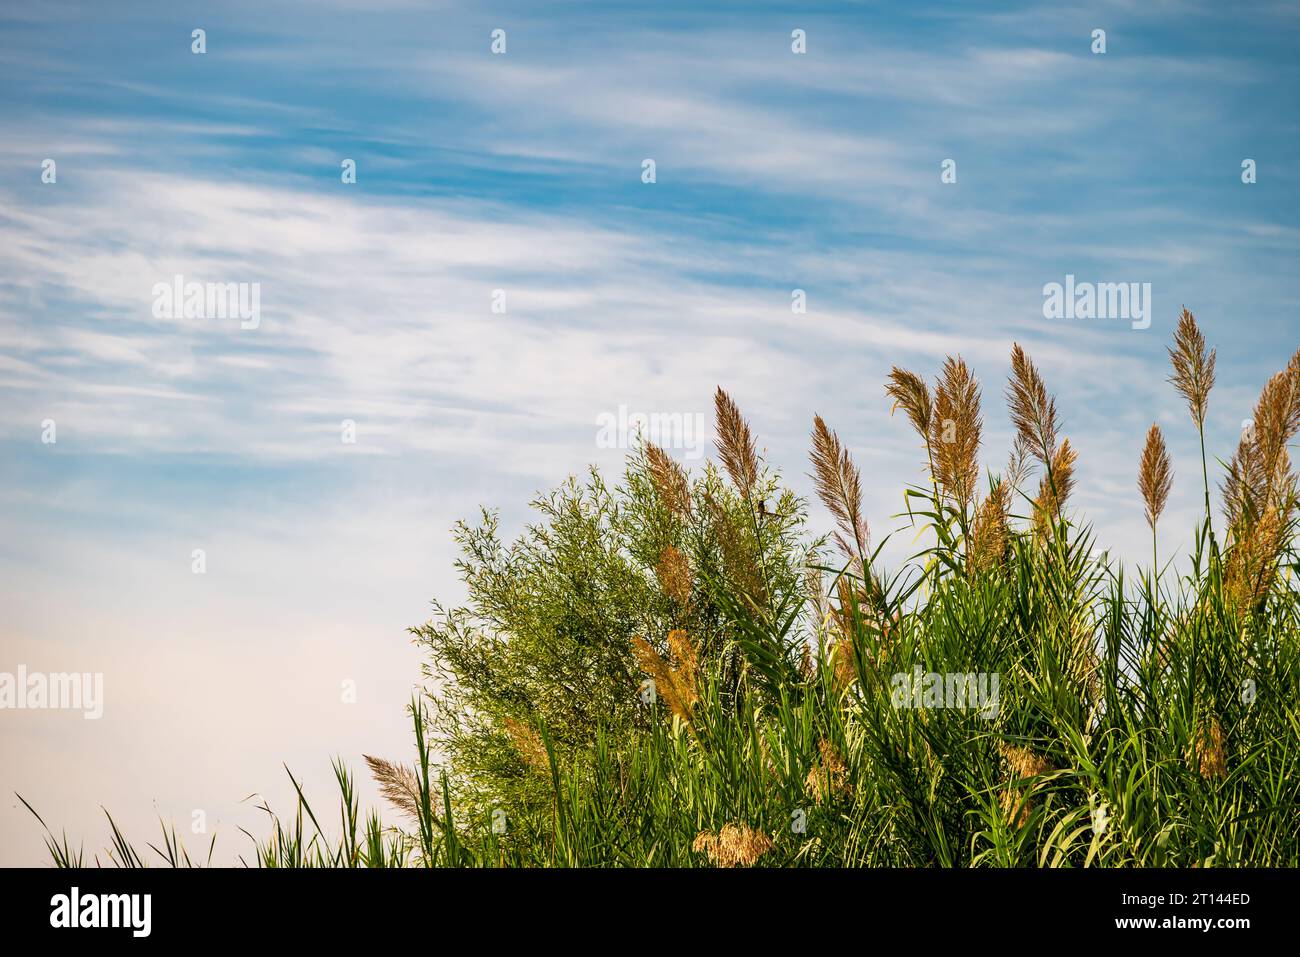 Tall reeds on the background of blue sky on a sunny day Stock Photo